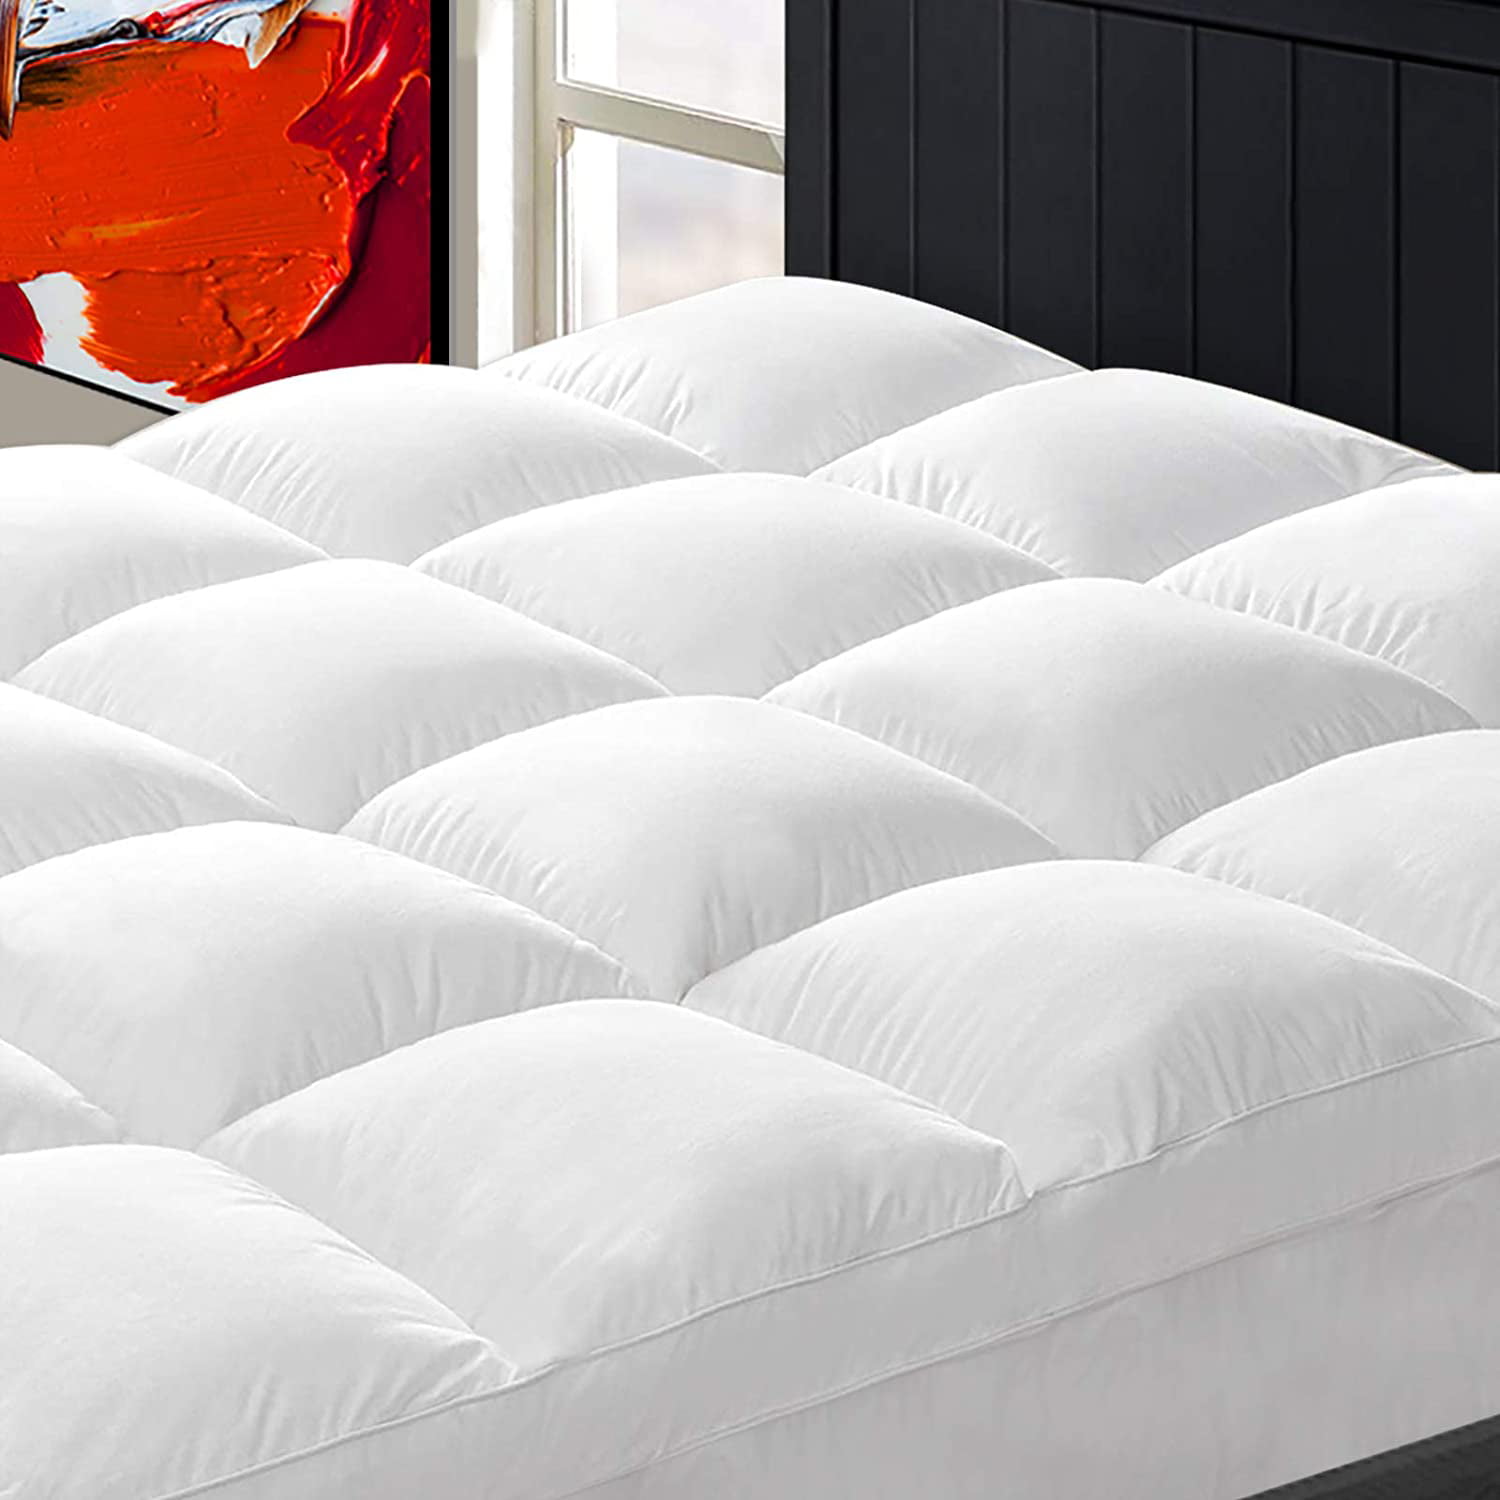 Details about   Queen Size Mattress Pad Cover Memory Foam Topper Luxury Thick Bed Pillow Top 